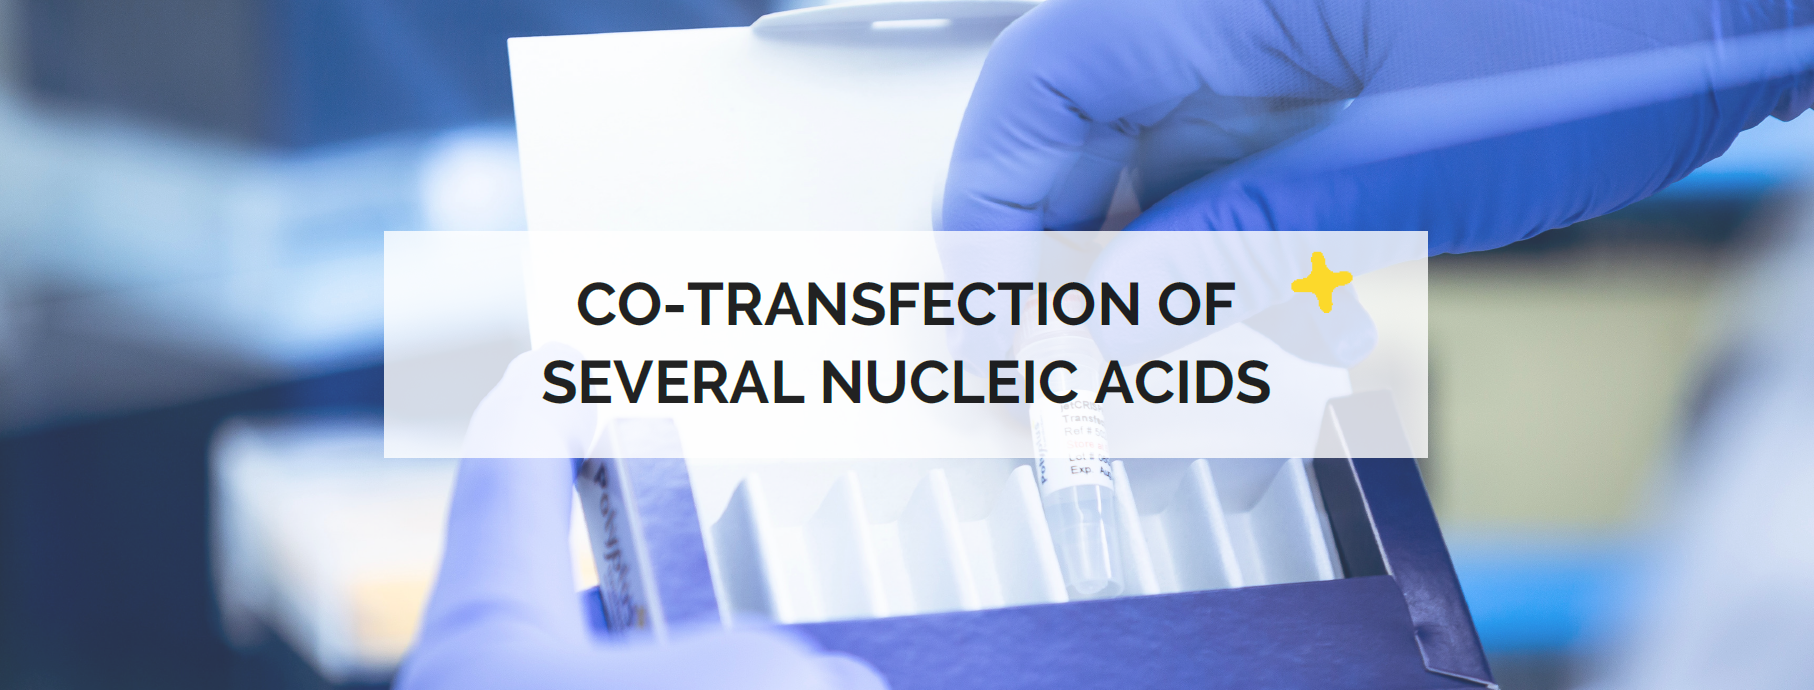 Co-transfection of several nucleic acids